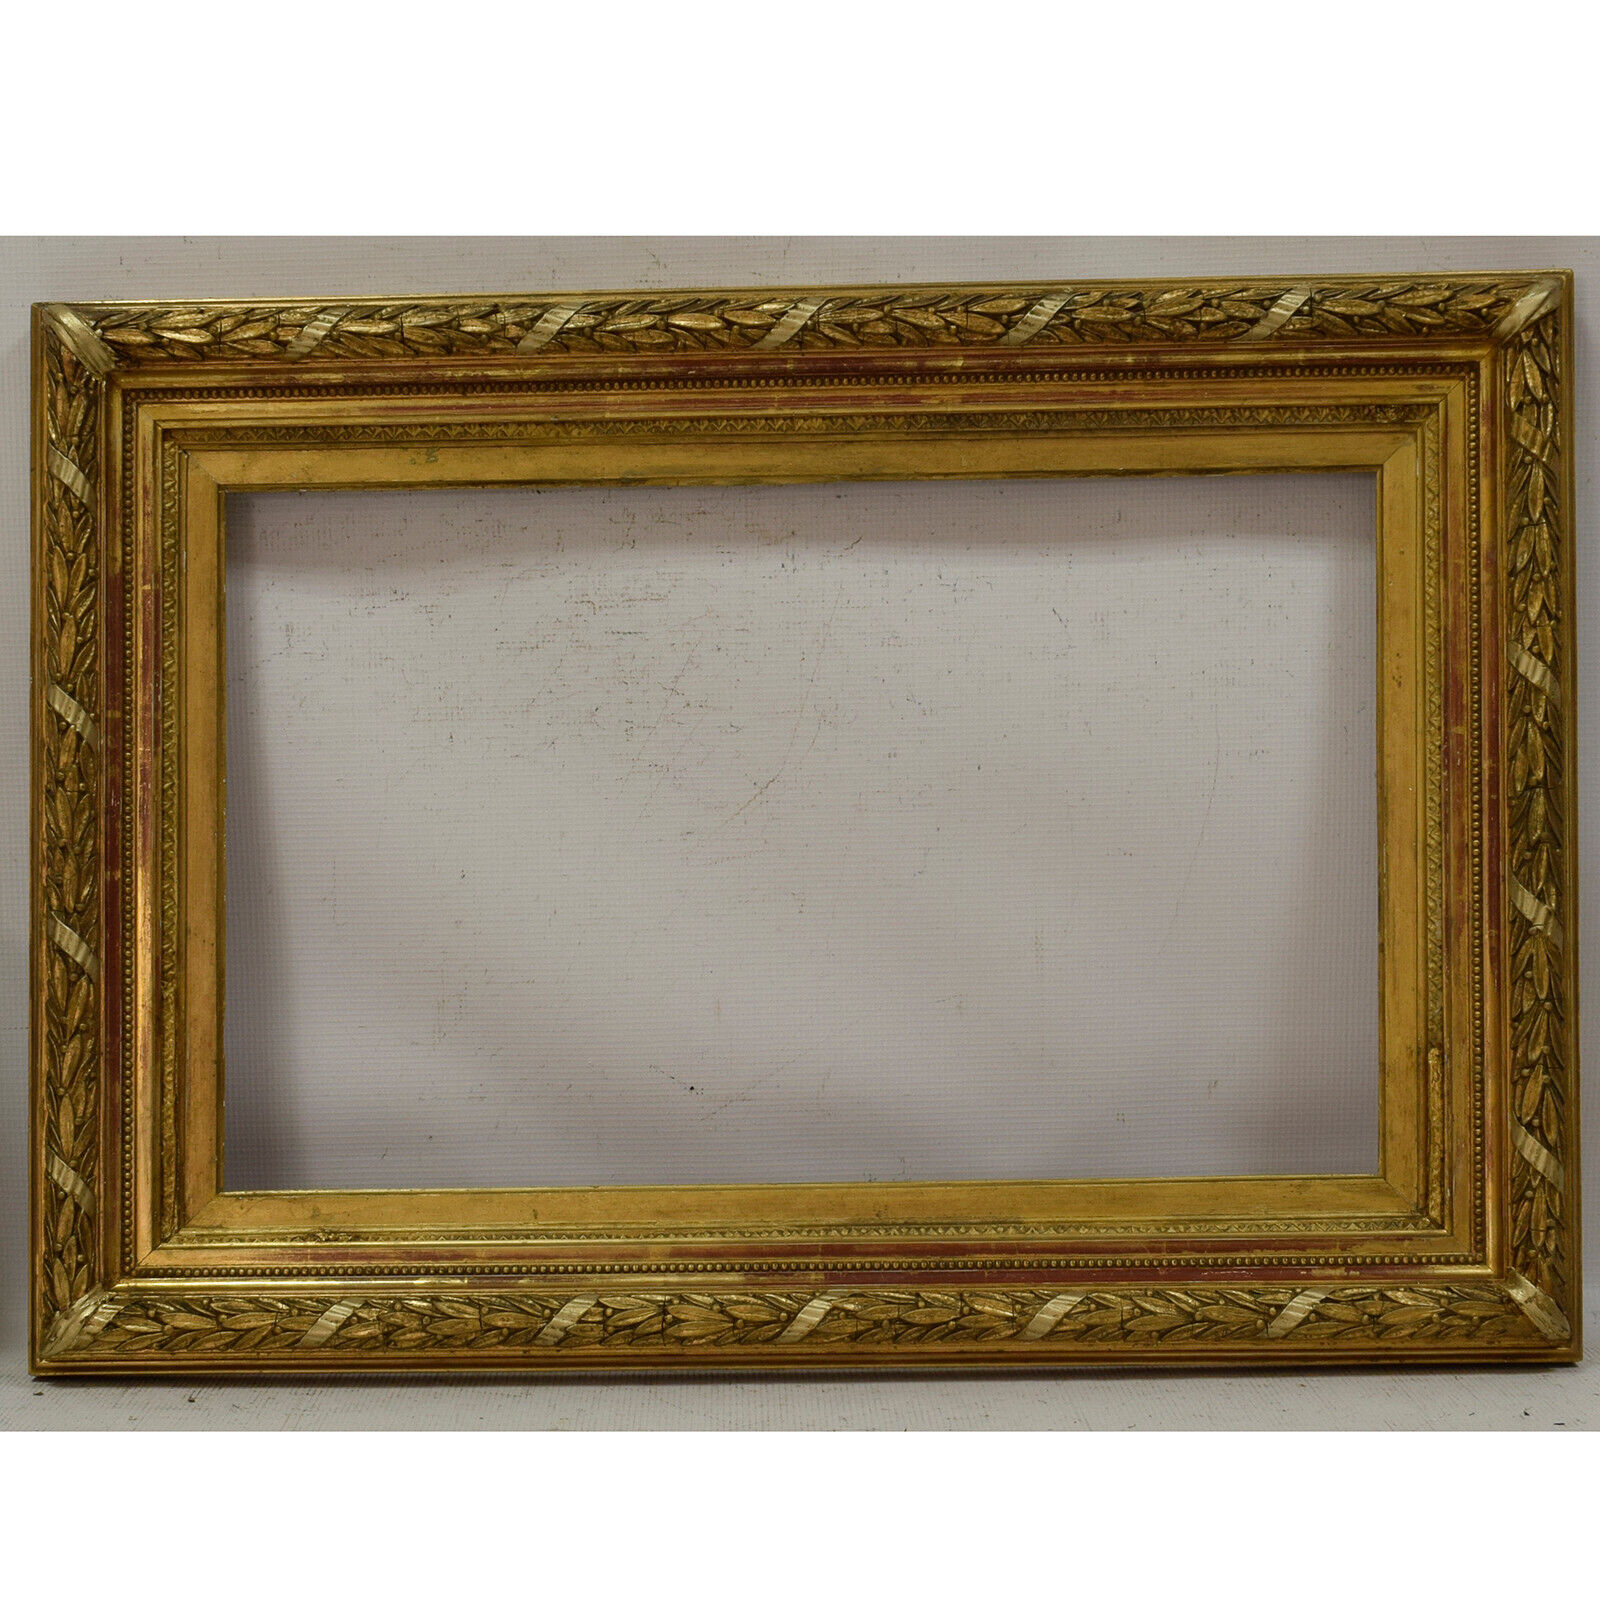 1906 Old wooden frame decorative Original condition Internal: 21,4x13,5 in